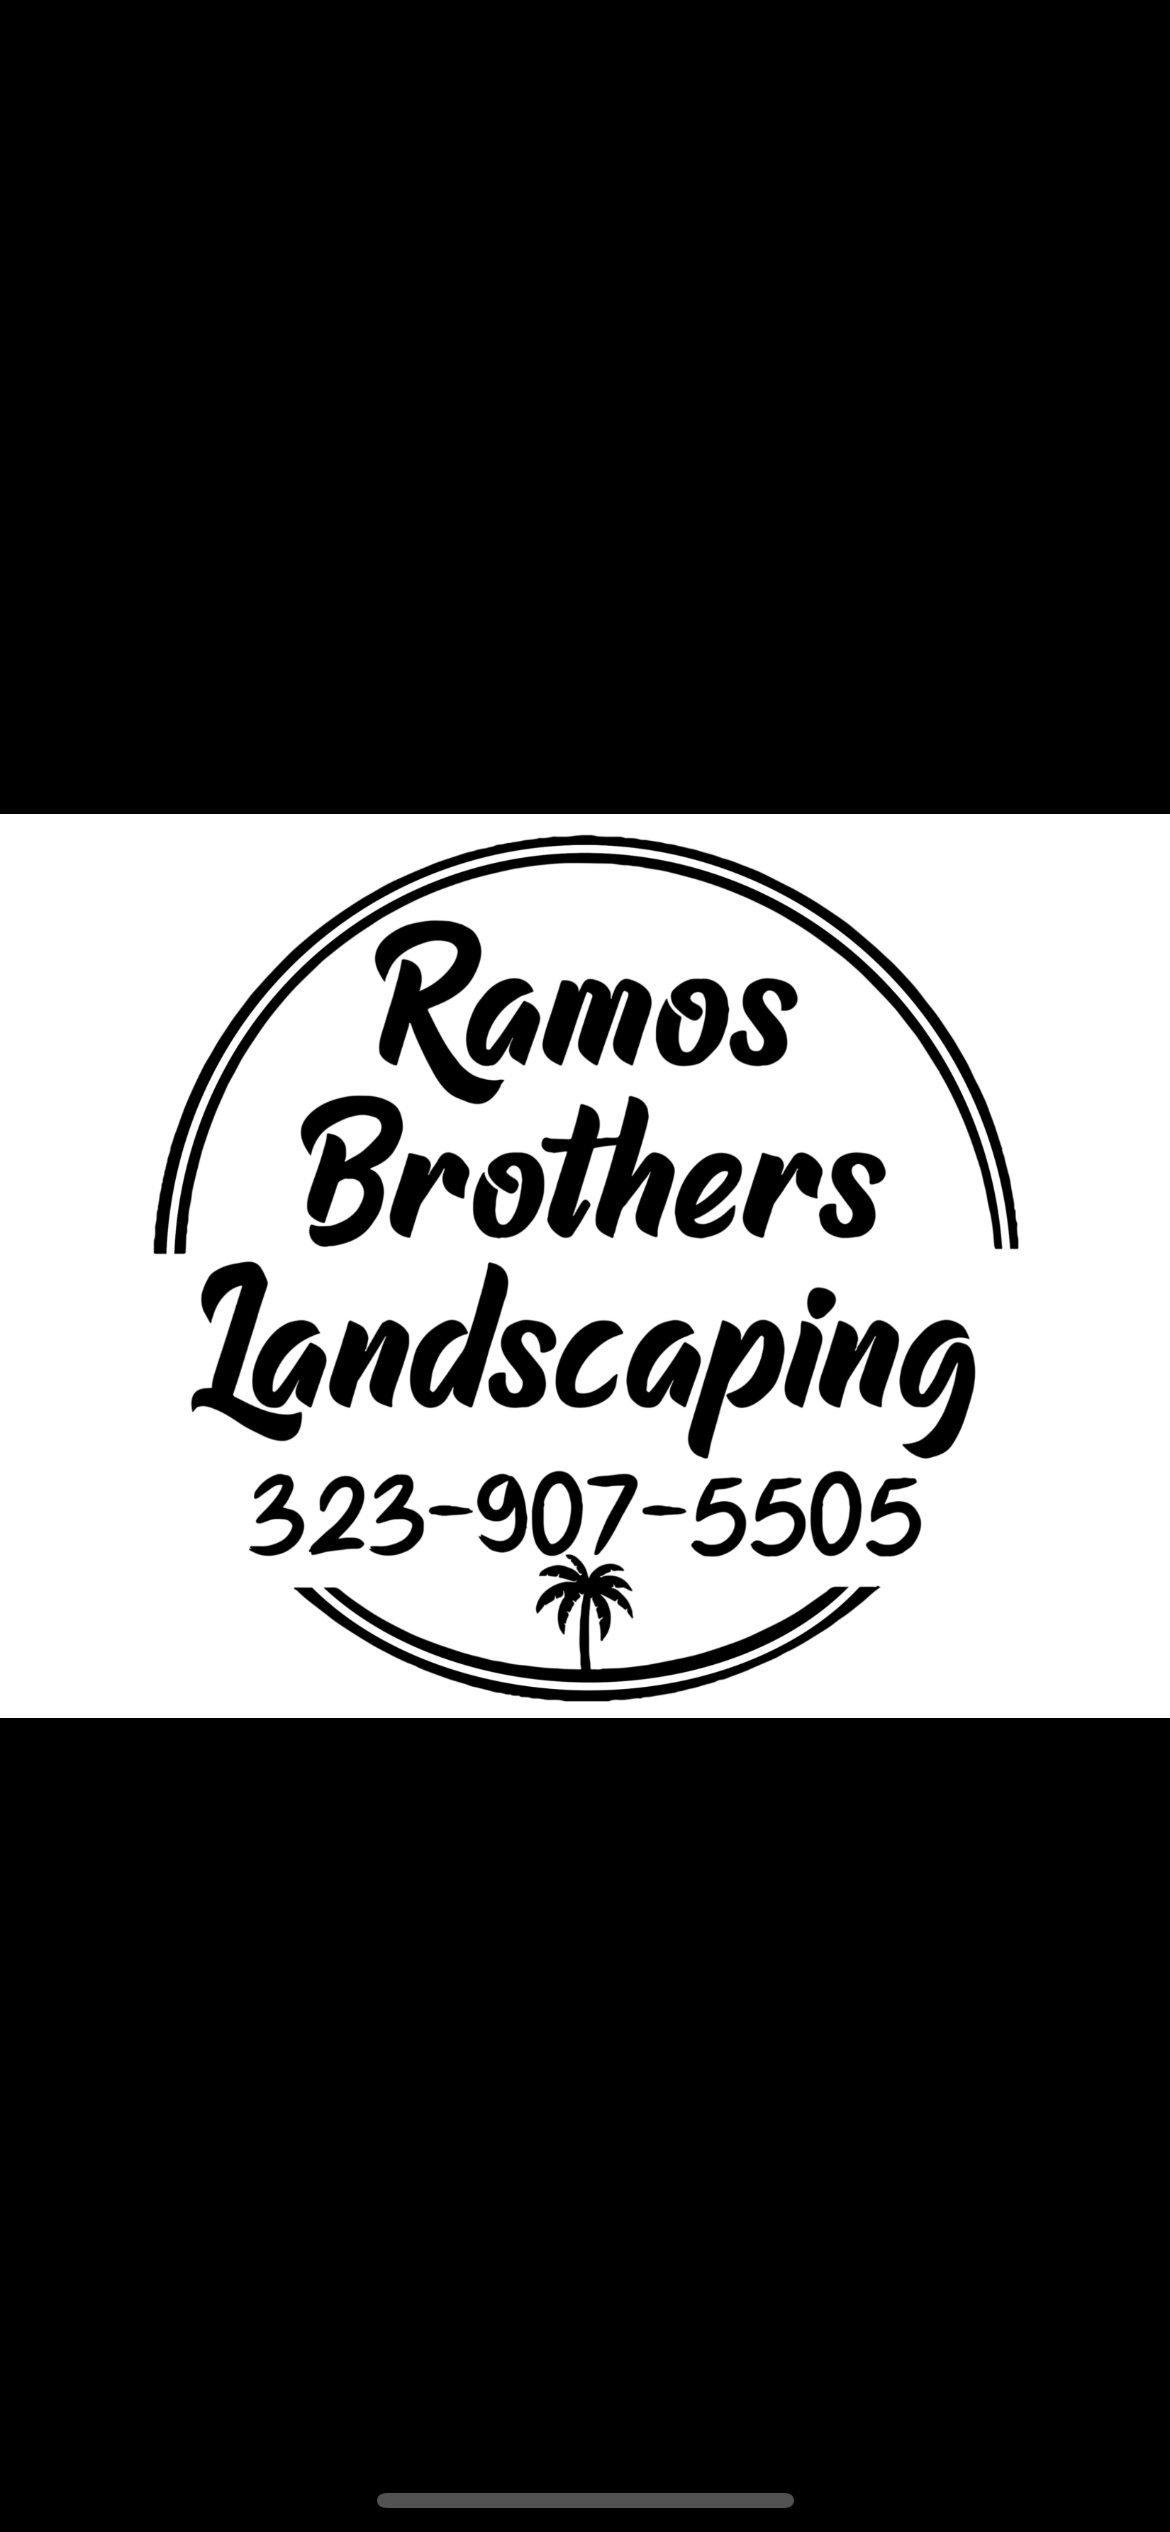 Ramos Brothers Landscaping -Unlicensed Contractor Logo